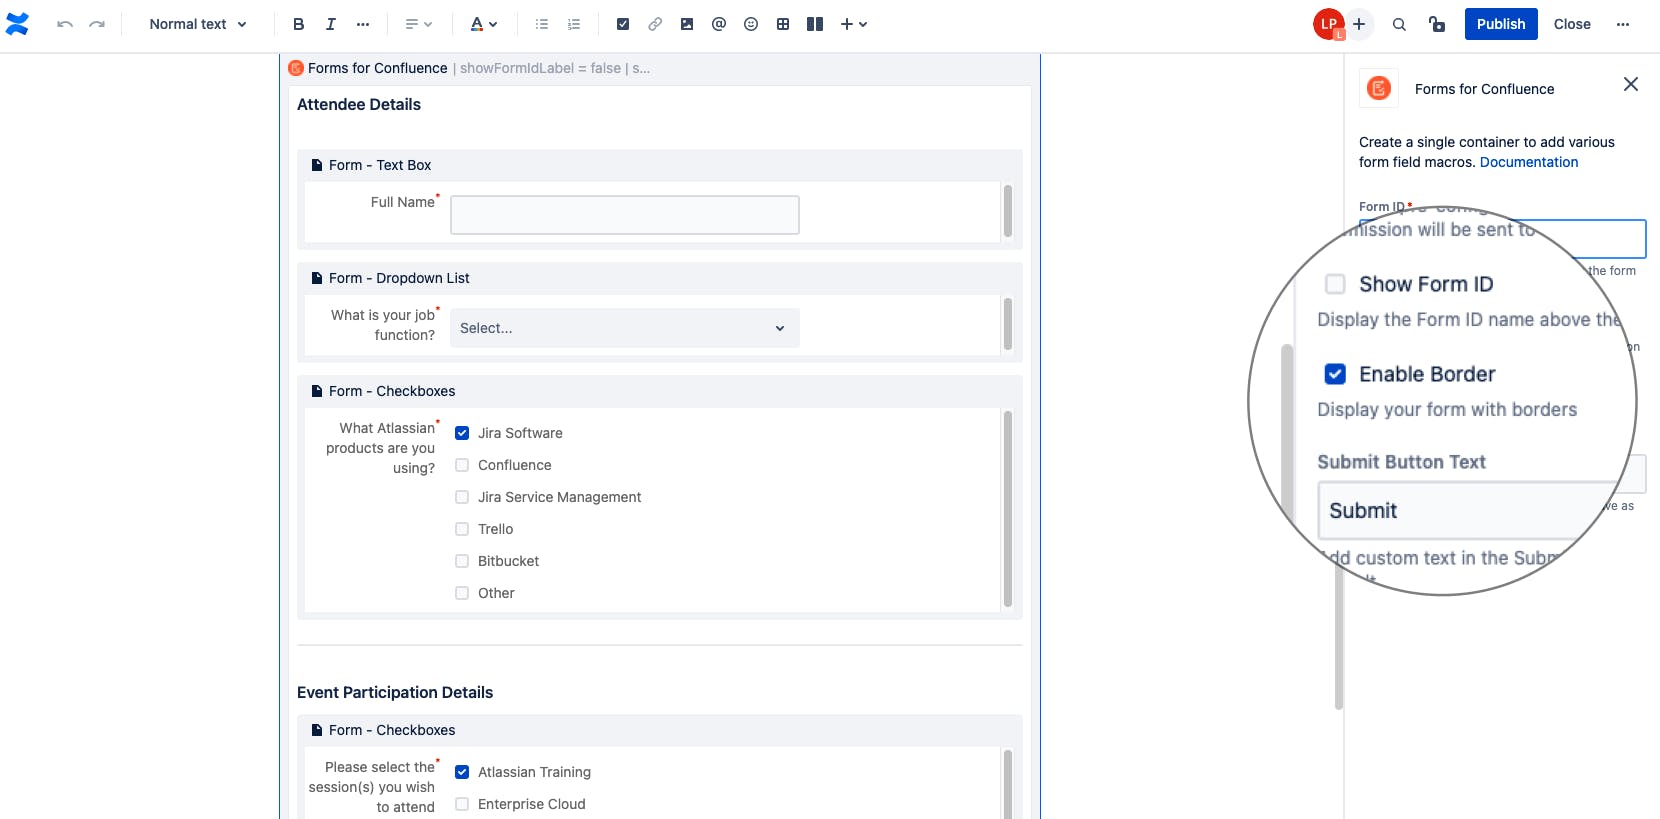 Screenshot of Forms for Confluence interface